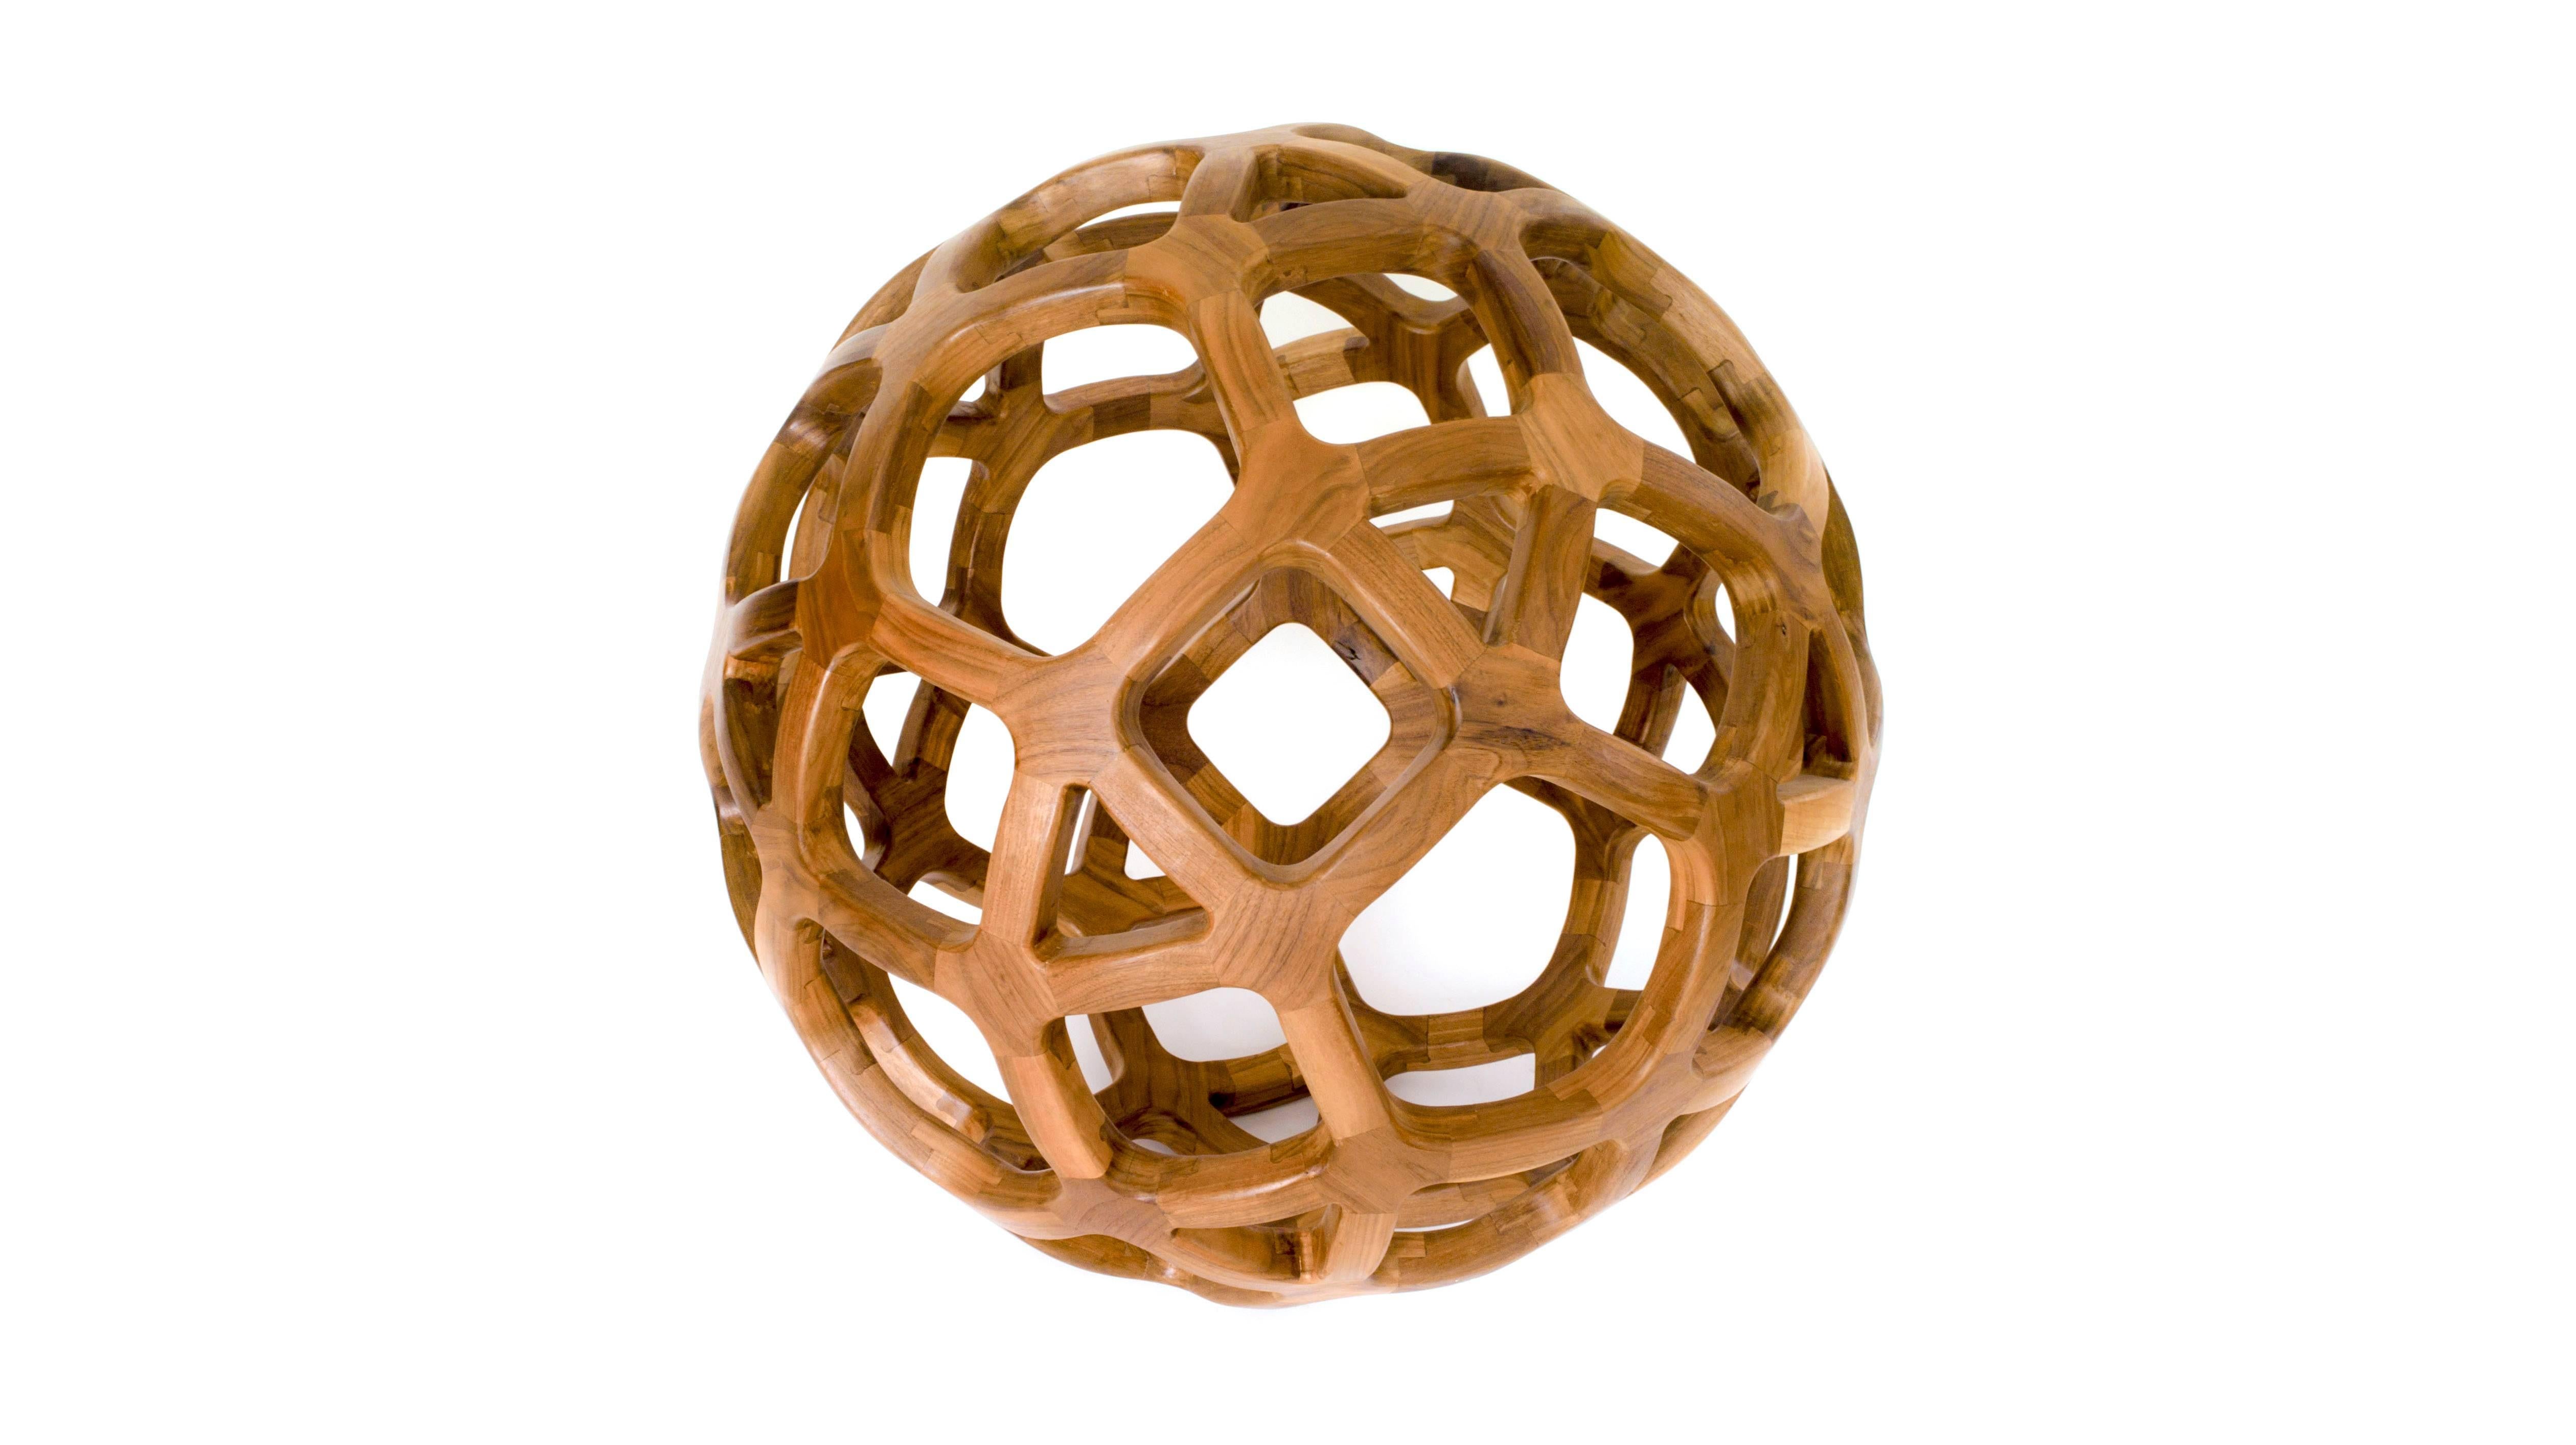 Contemporary Mexican Handcrafted Geometric Archimedean Sphere Walnut Sculpture For Sale 2